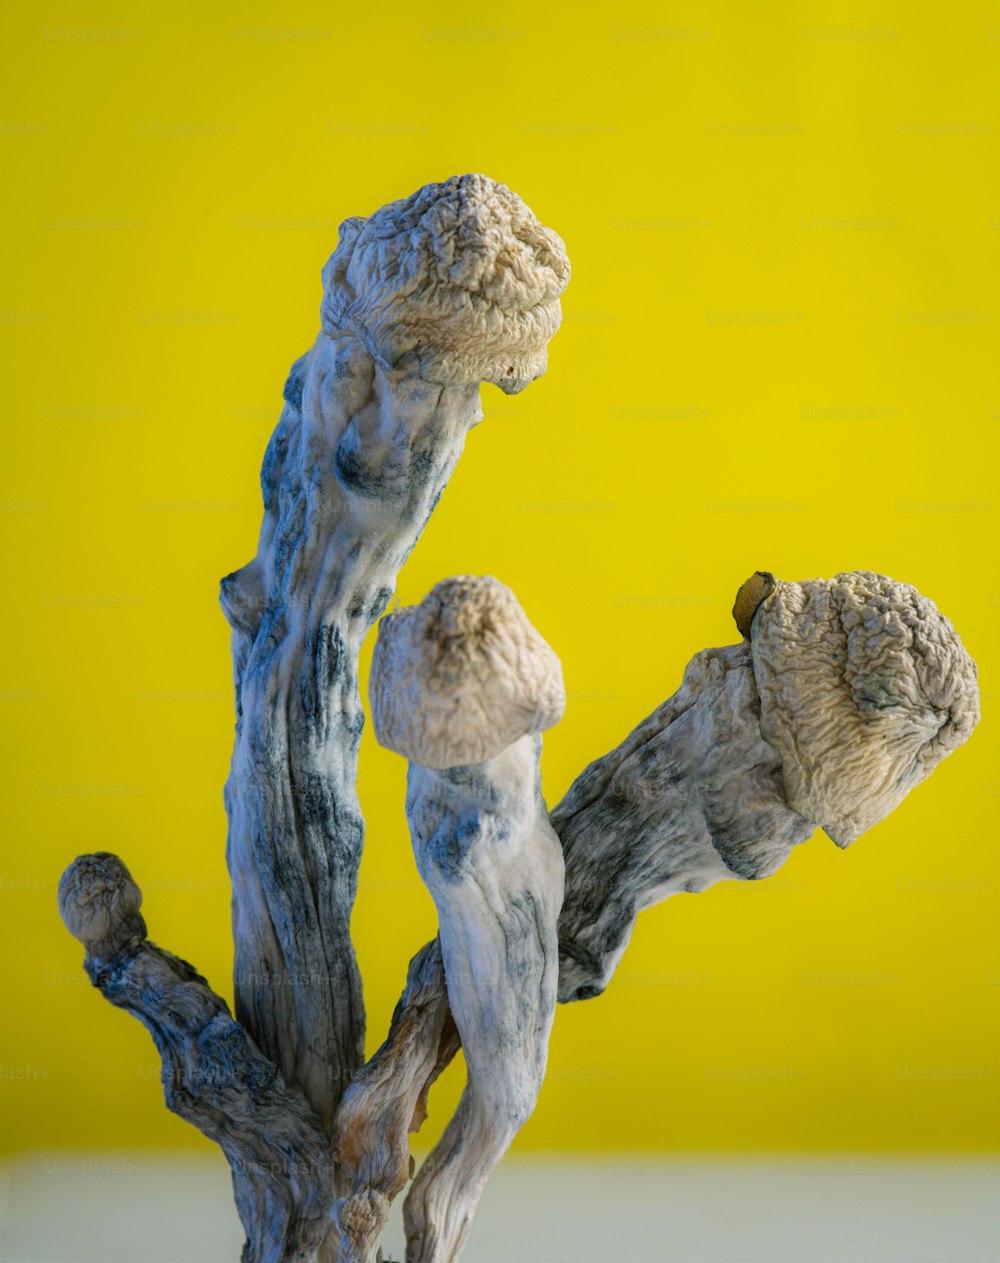 a sculpture of a tree branch against a yellow background